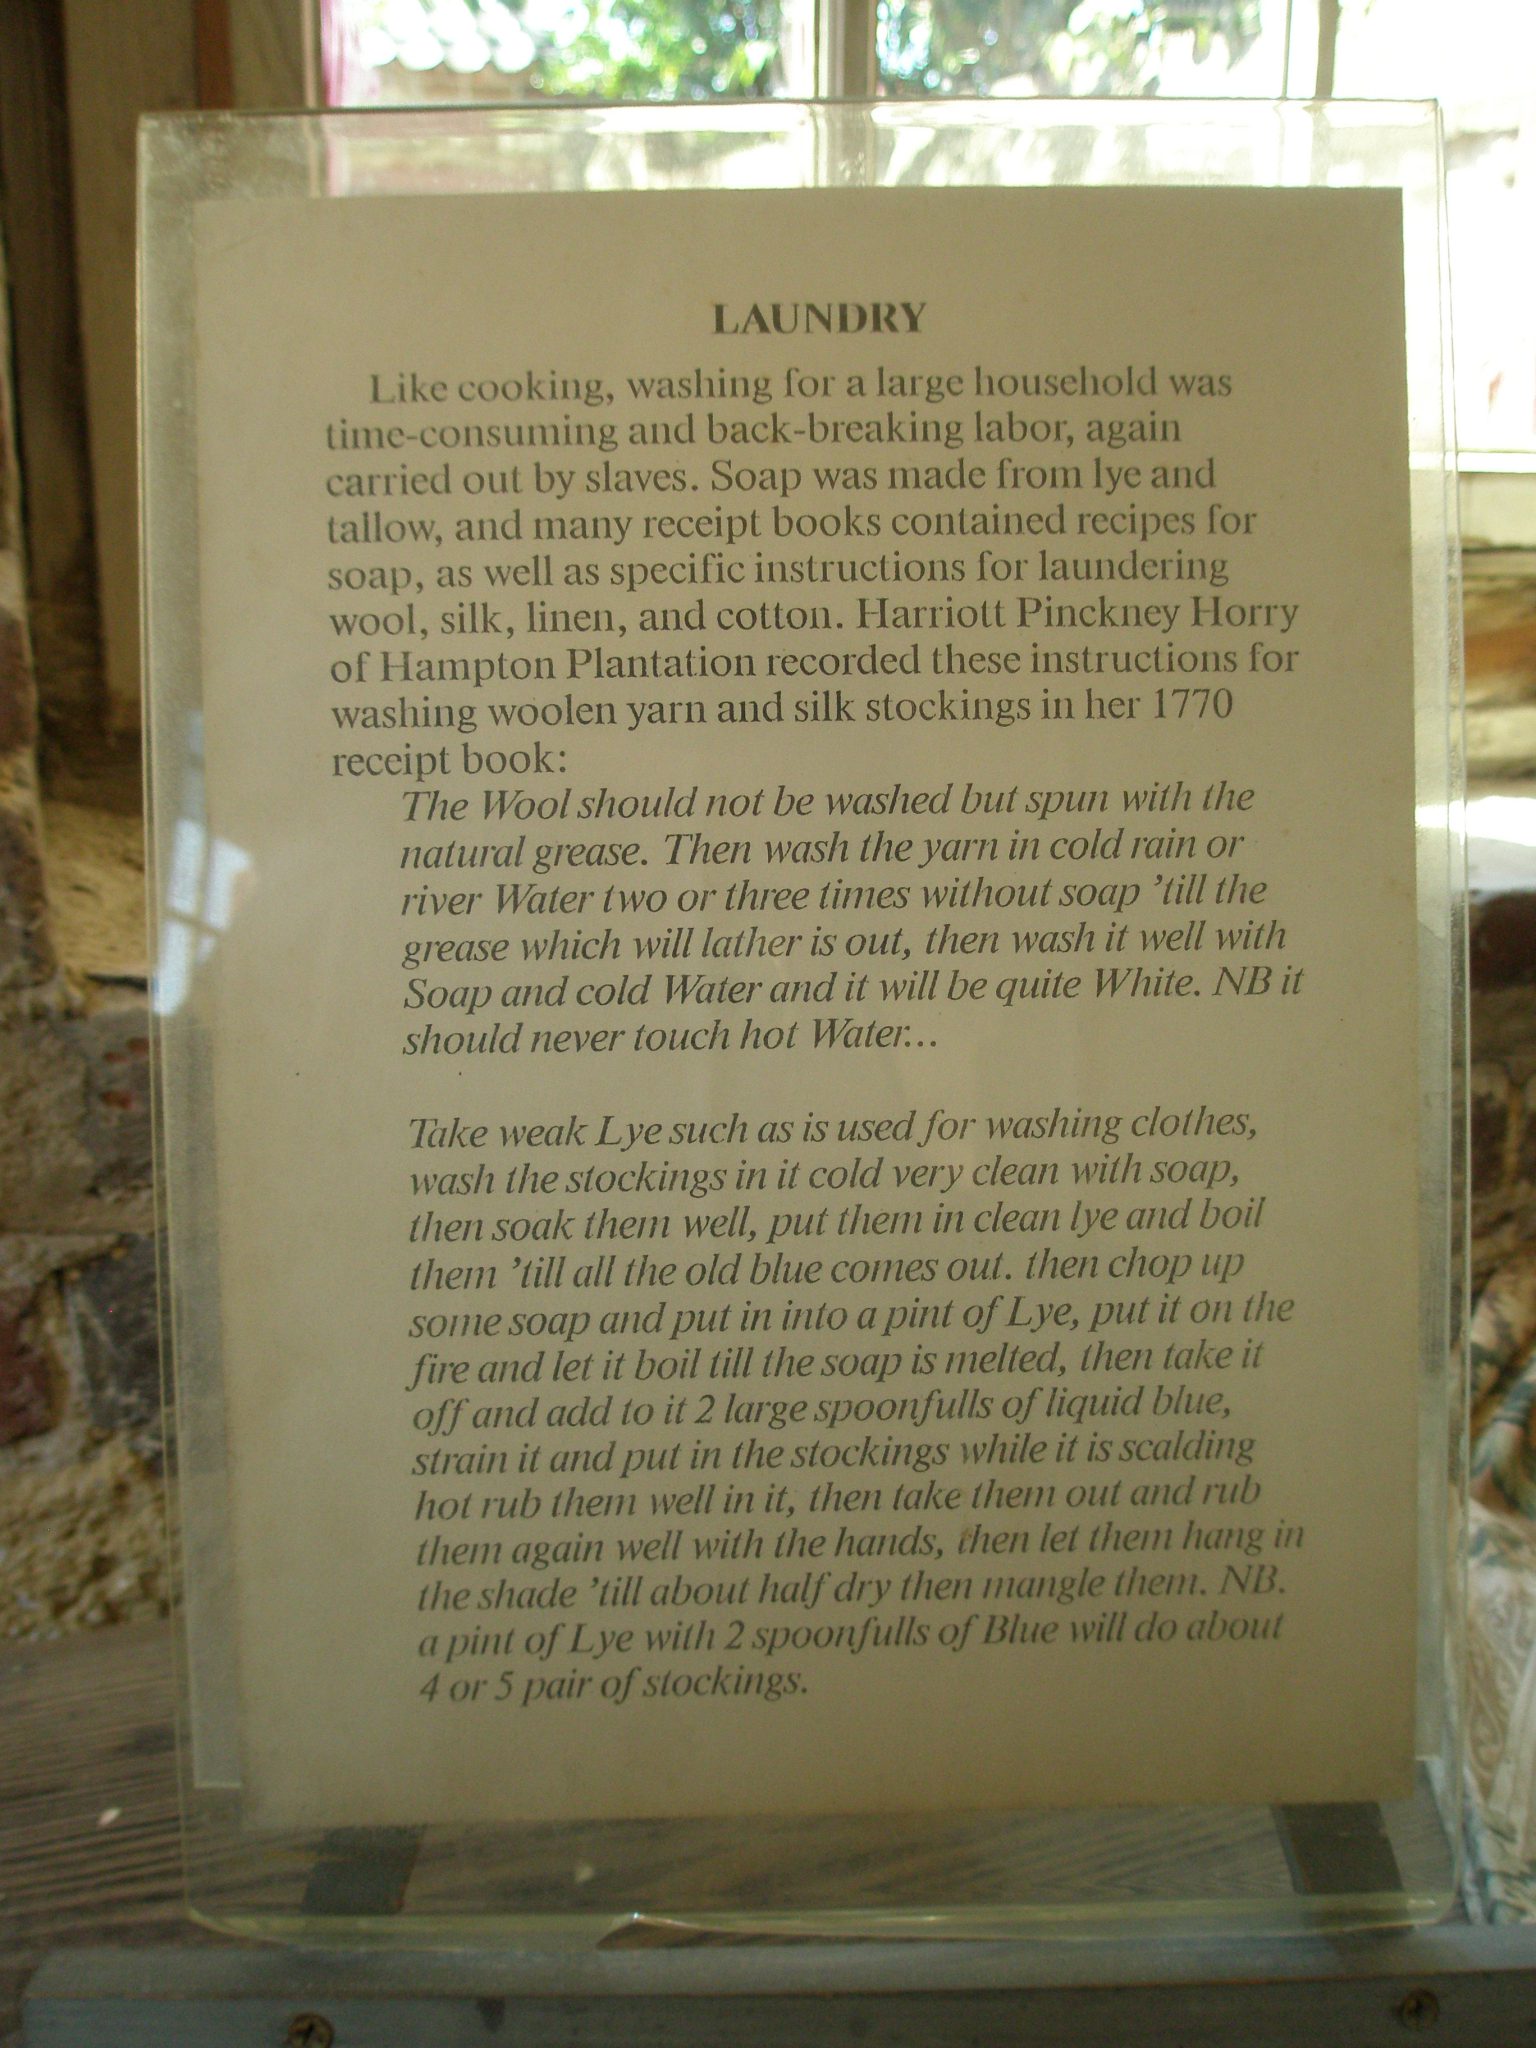 Explanatory notes about the Laundrey